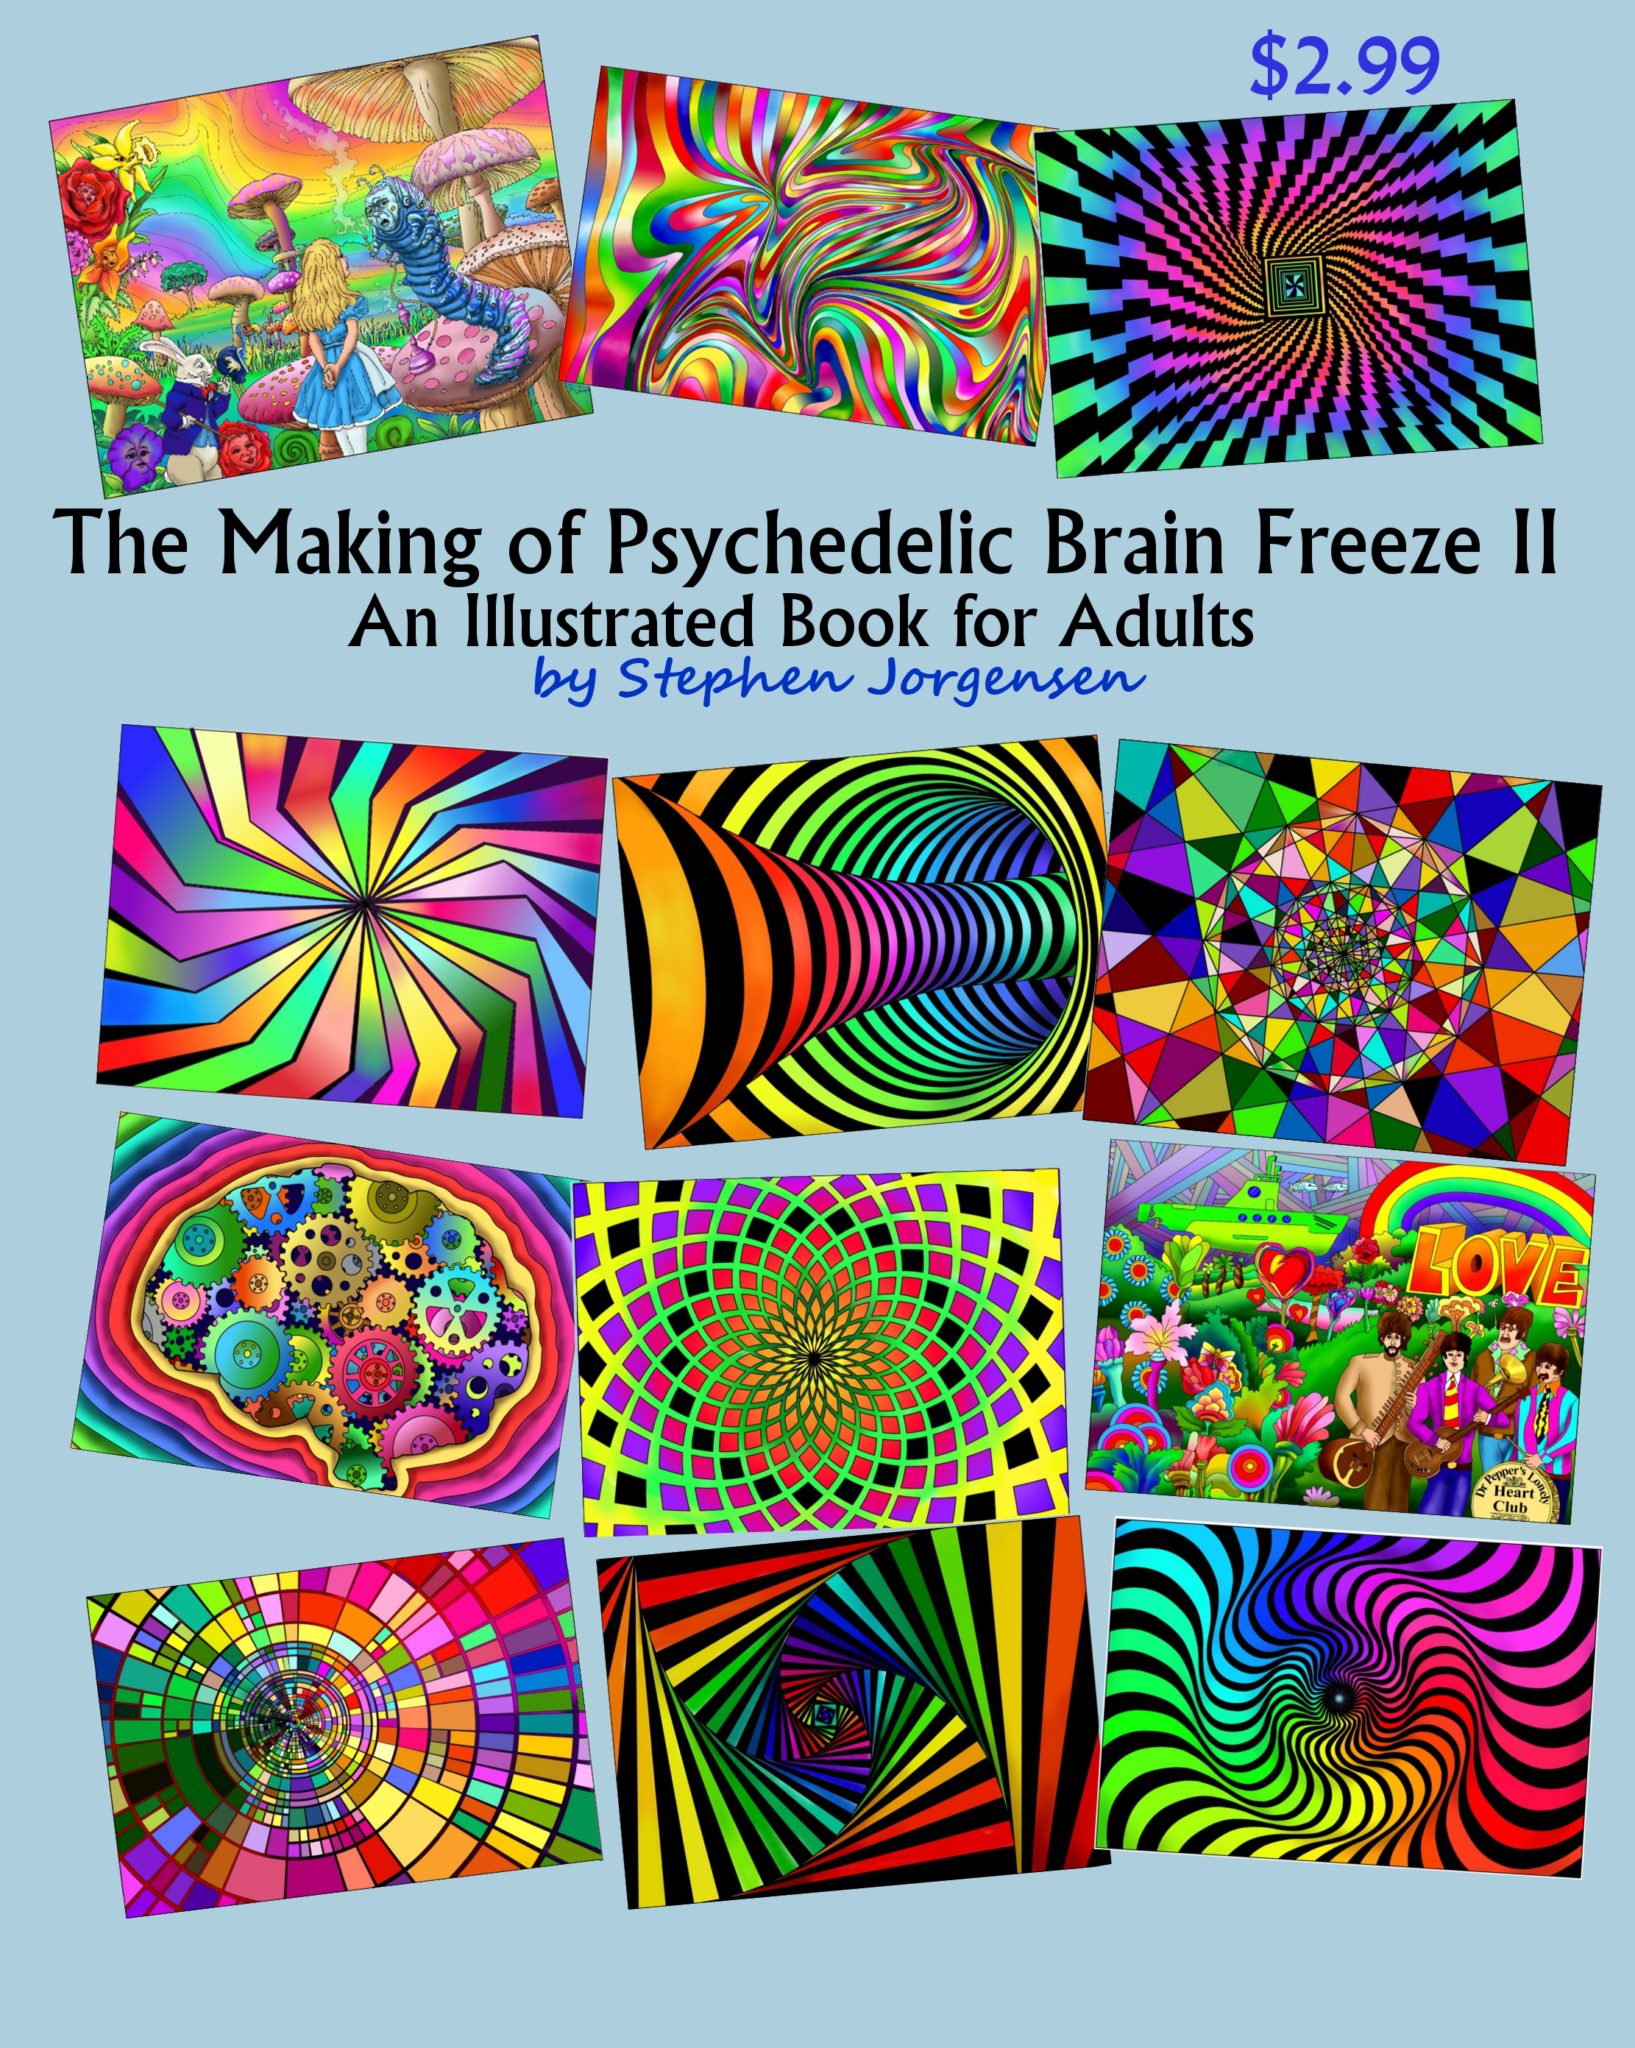 FREE: The Making of Psychedelic Brain Freeze II, an Illustrated Book for Adults by Stephen Jorgensen